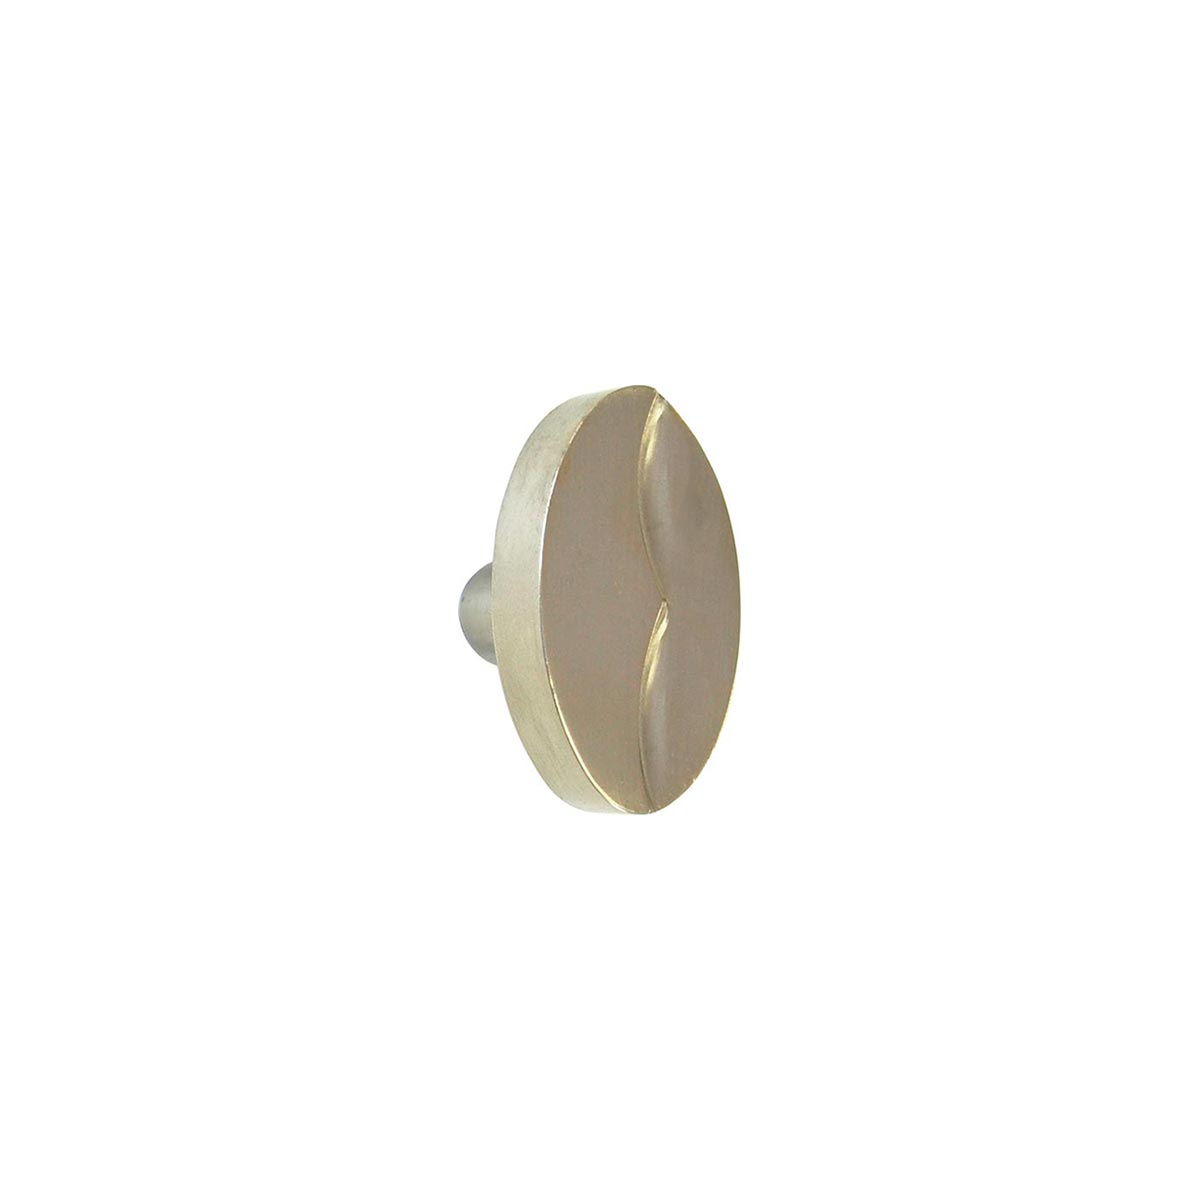 Solid Bronze Cayman 1.75 inch Oval Cabinet Knob